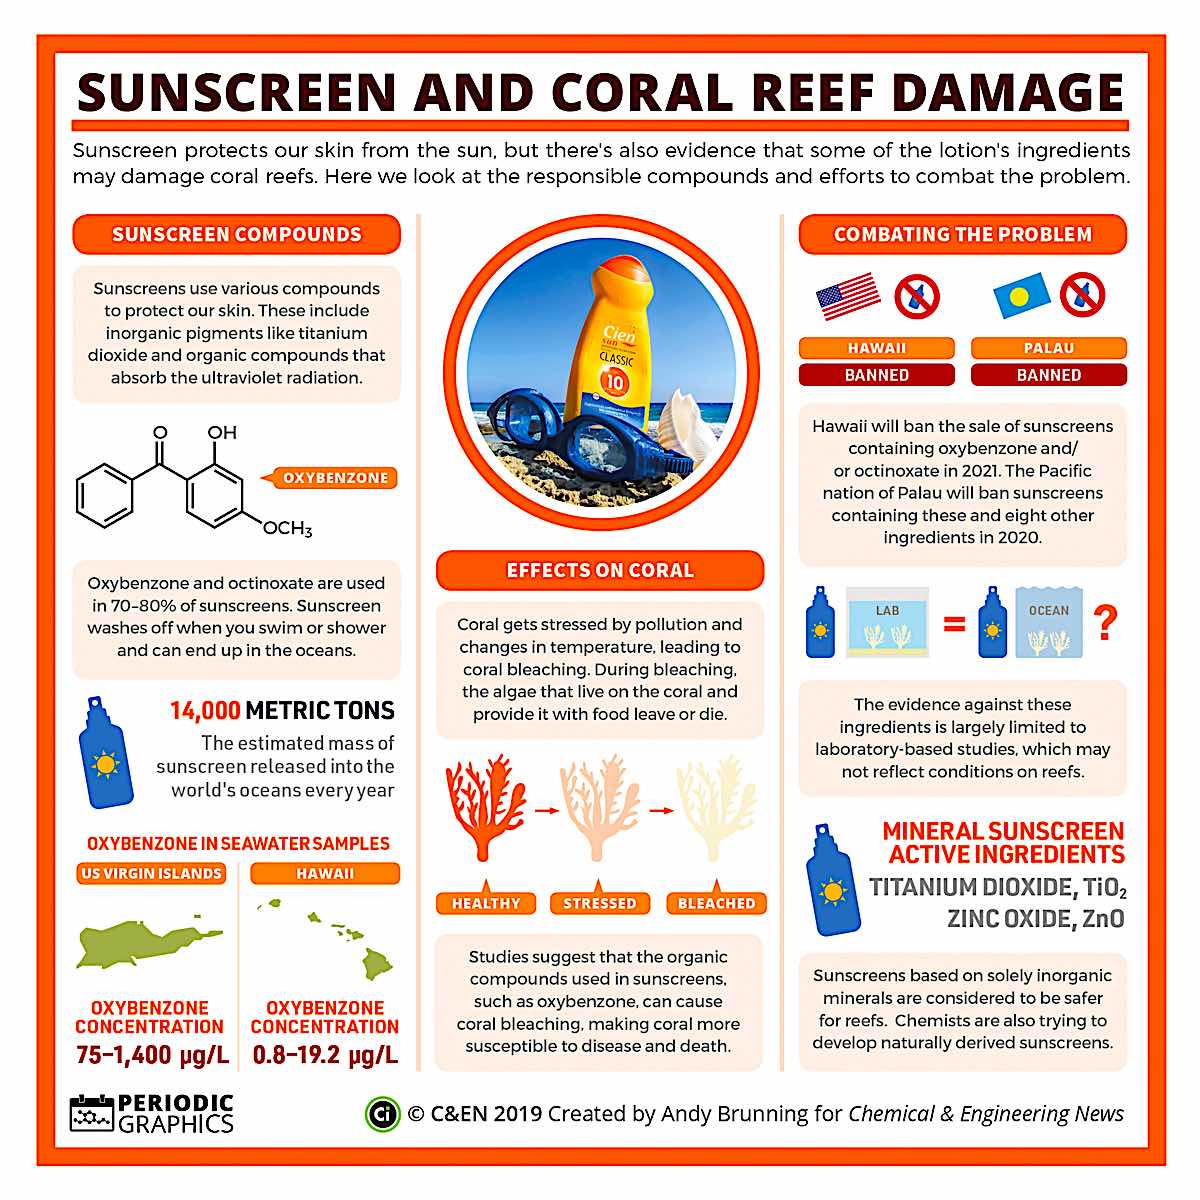 www.thefunkyturtle.com safe suncreen to protect coral reefs